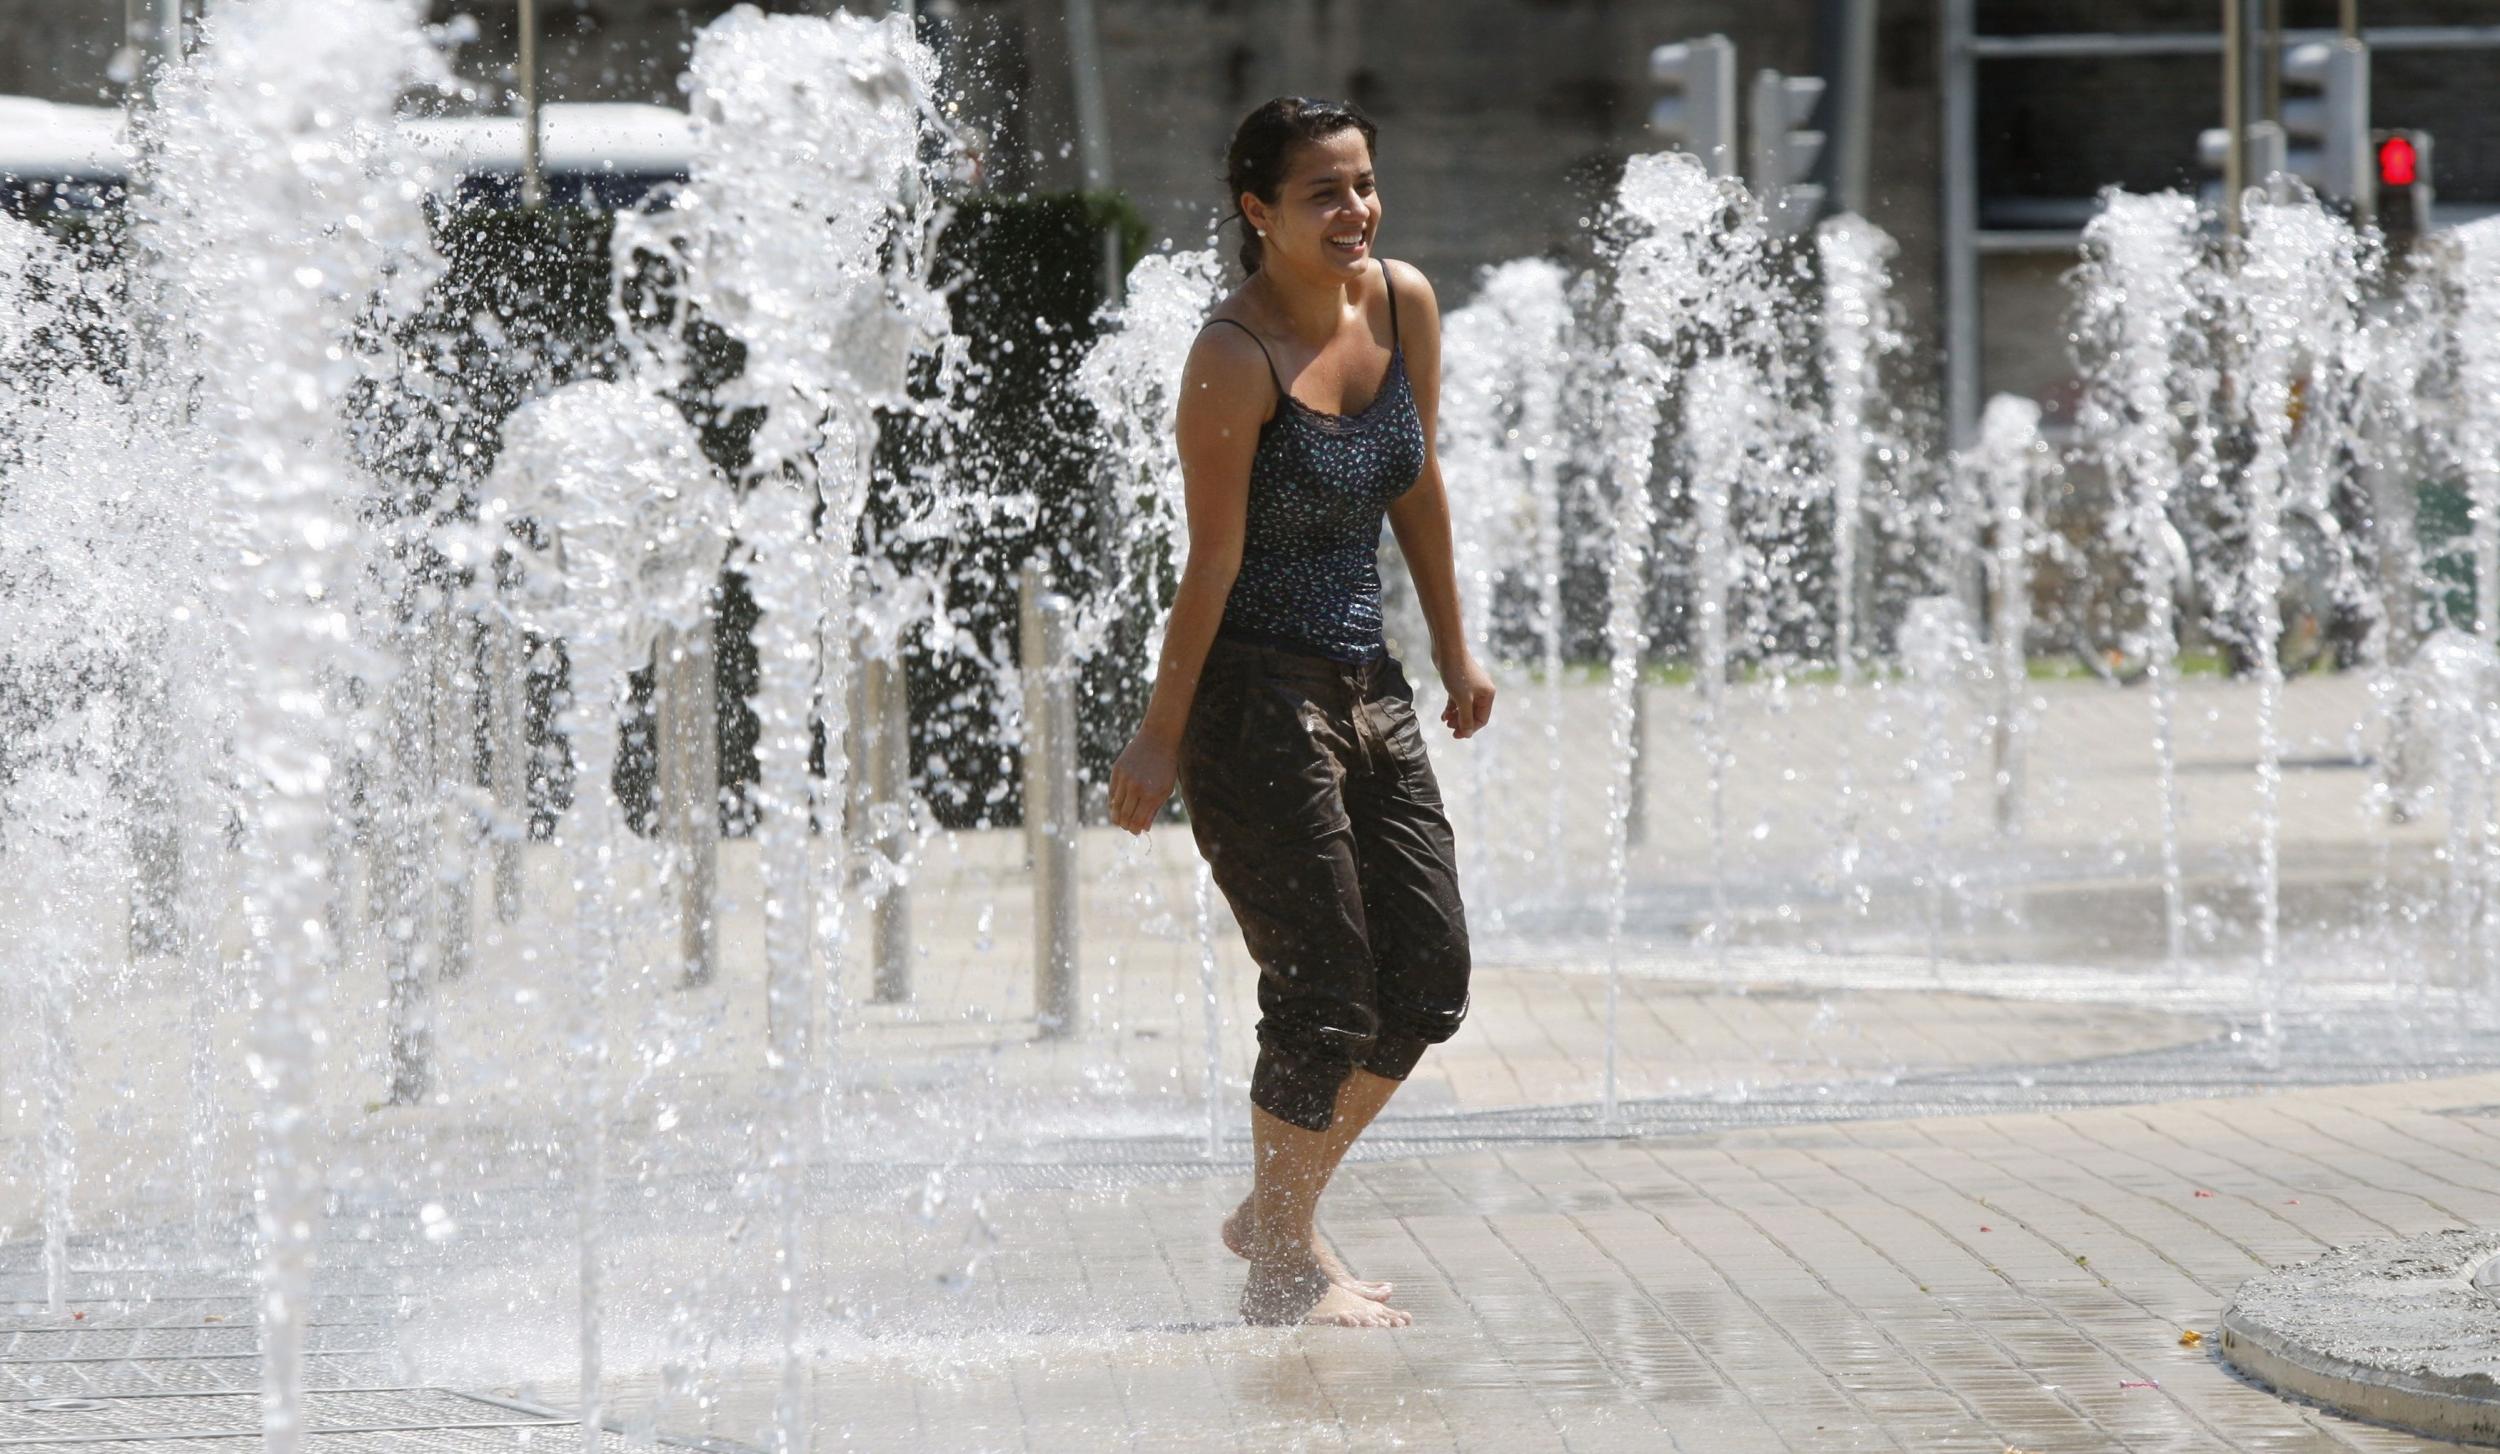 A girl takes a cooling dip in Abandoibarra Park in Bilbao